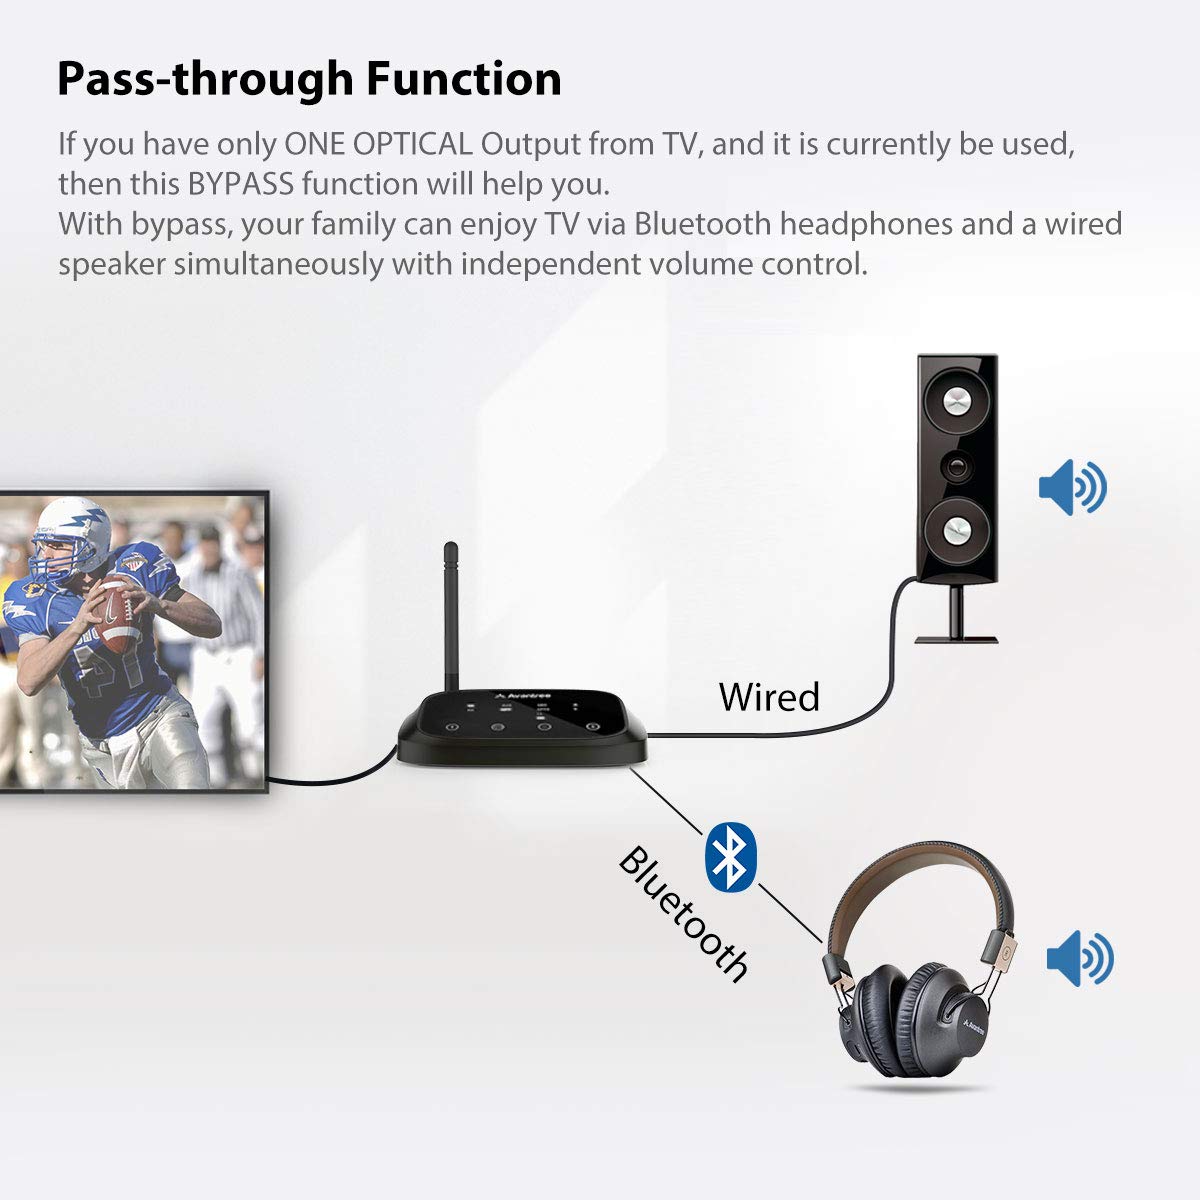 Avantree Oasis Bluetooth Transmitter and Receiver - Headphone